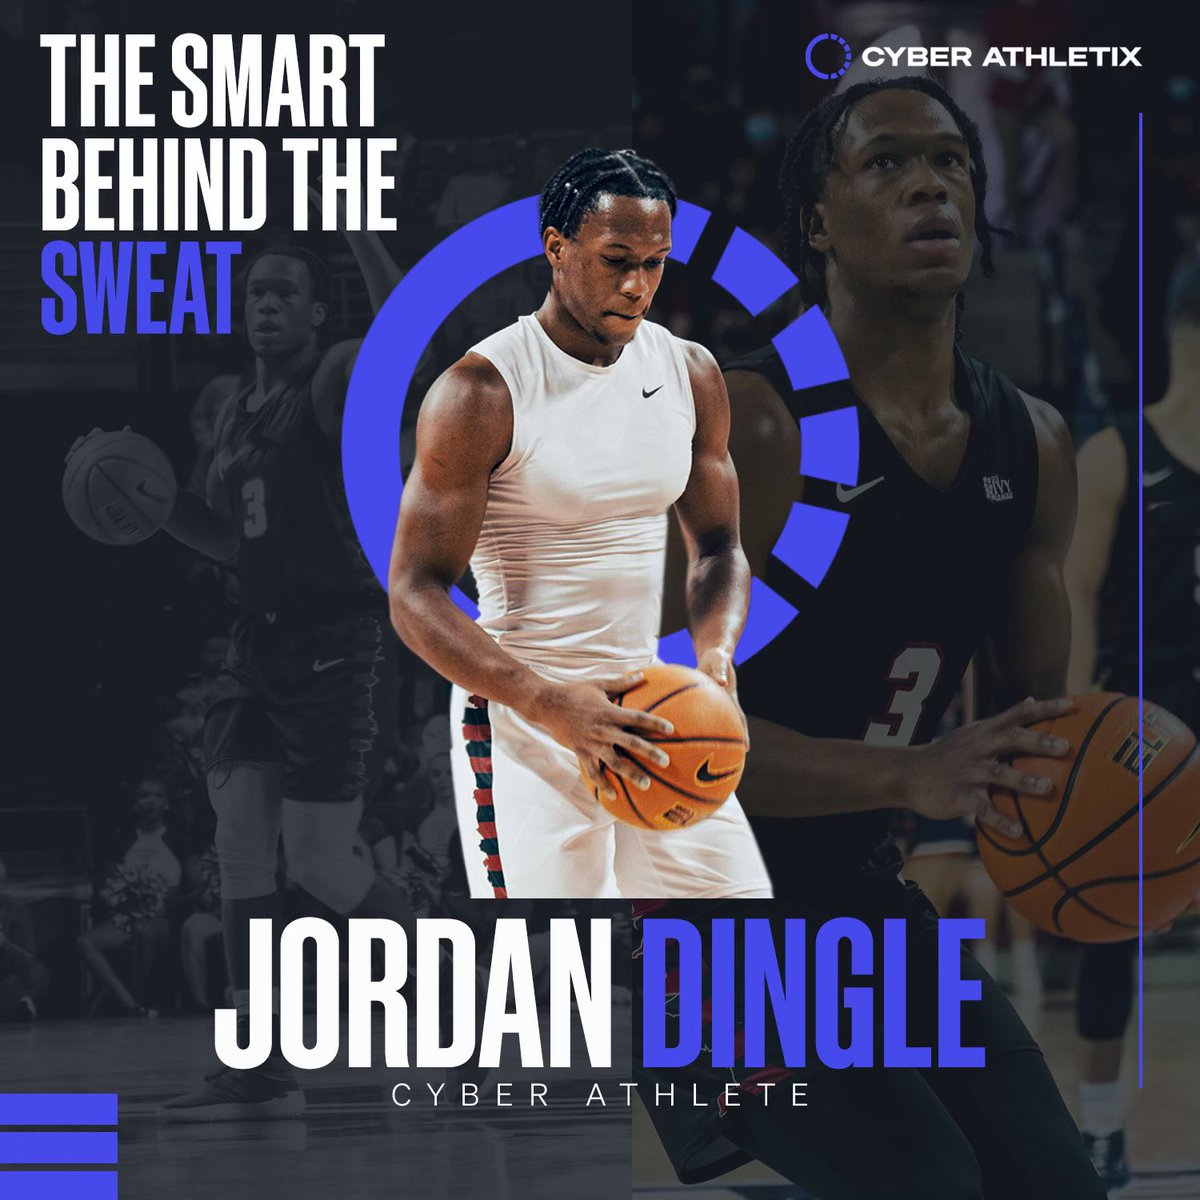 THE SMART BEHIND THE SWEAT

We are excited to announce Jordan Dingle is officially a Cyber Athlete💙

Jordan’s dedication to his academic & athletic obligations makes him so deserving to receive an NIL deal to become a Cyber Athlete❤️

THE SMART BEHIND THE SWEAT

#cyberathletix